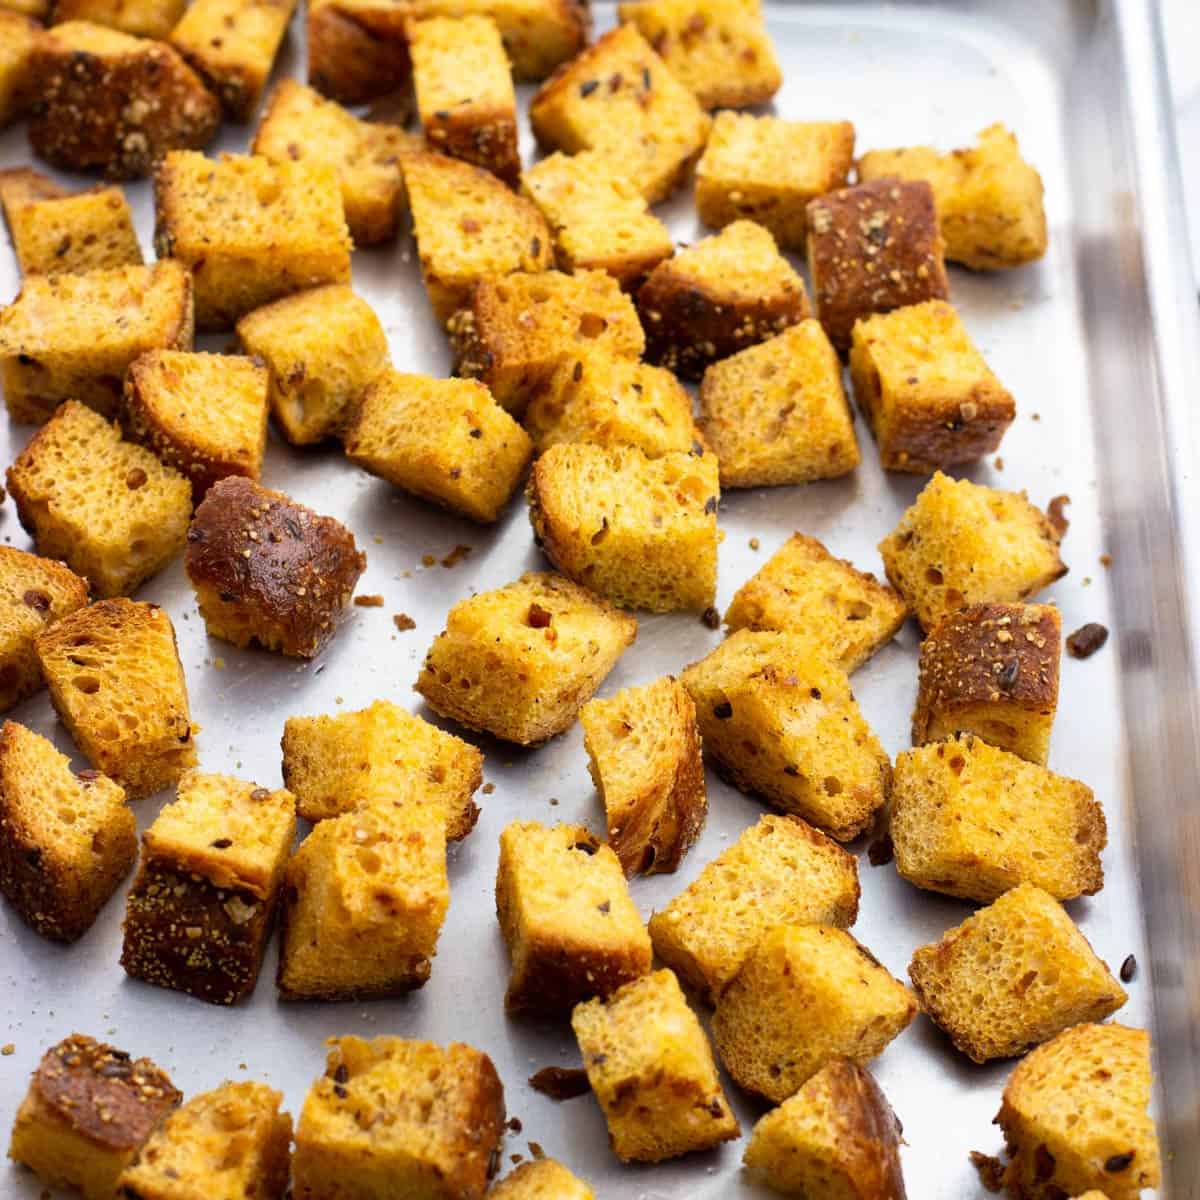 How to Make Croutons - My Sequined Life